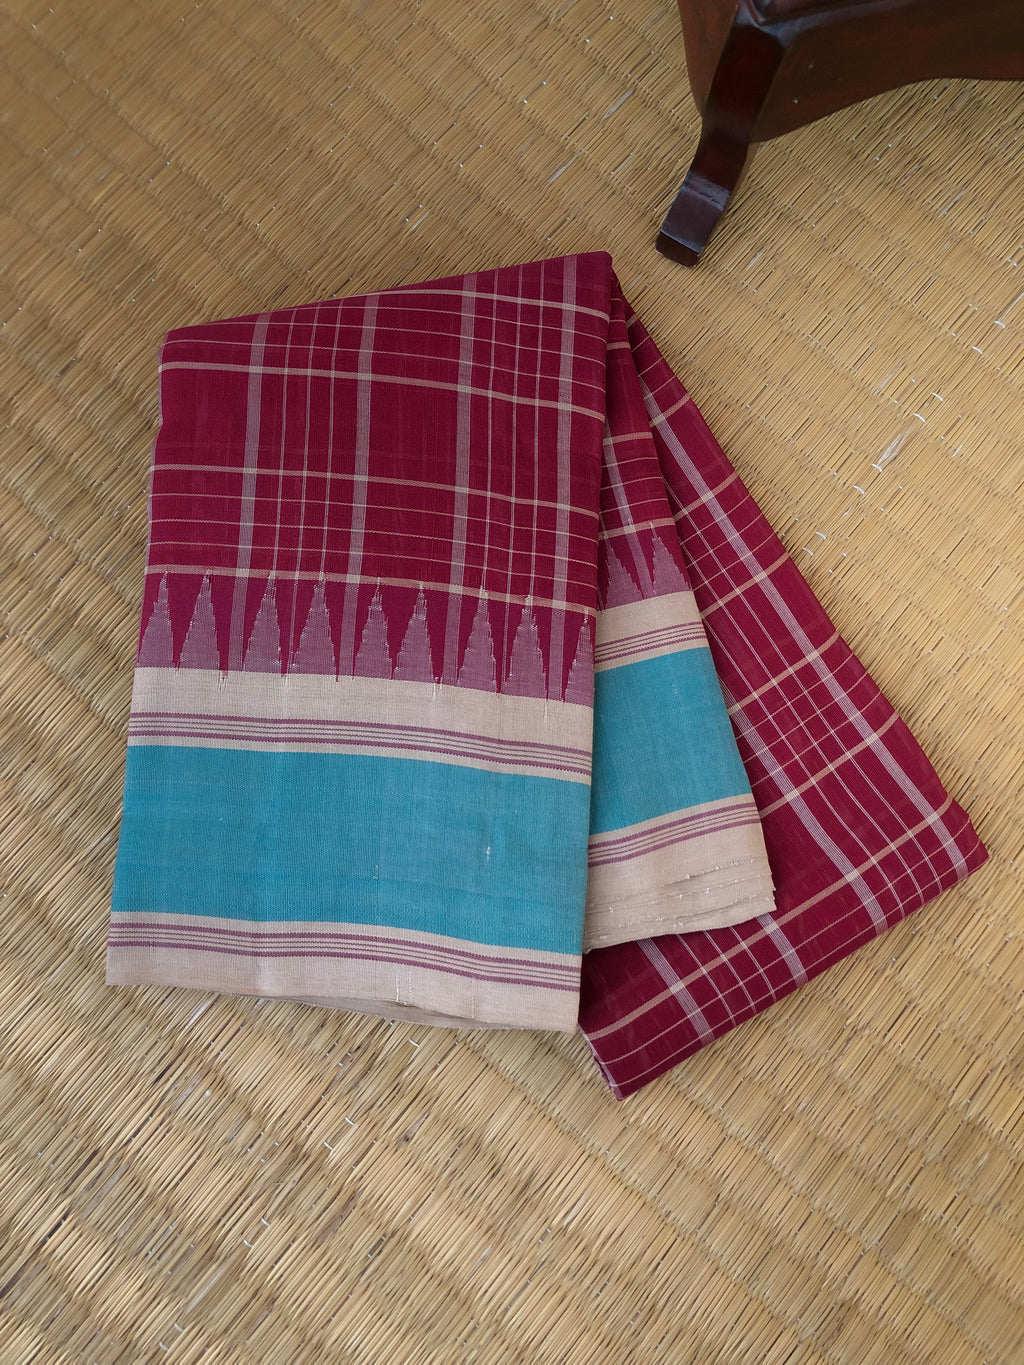 Signature Korvai Silk Cottons - maroon and beige chexs